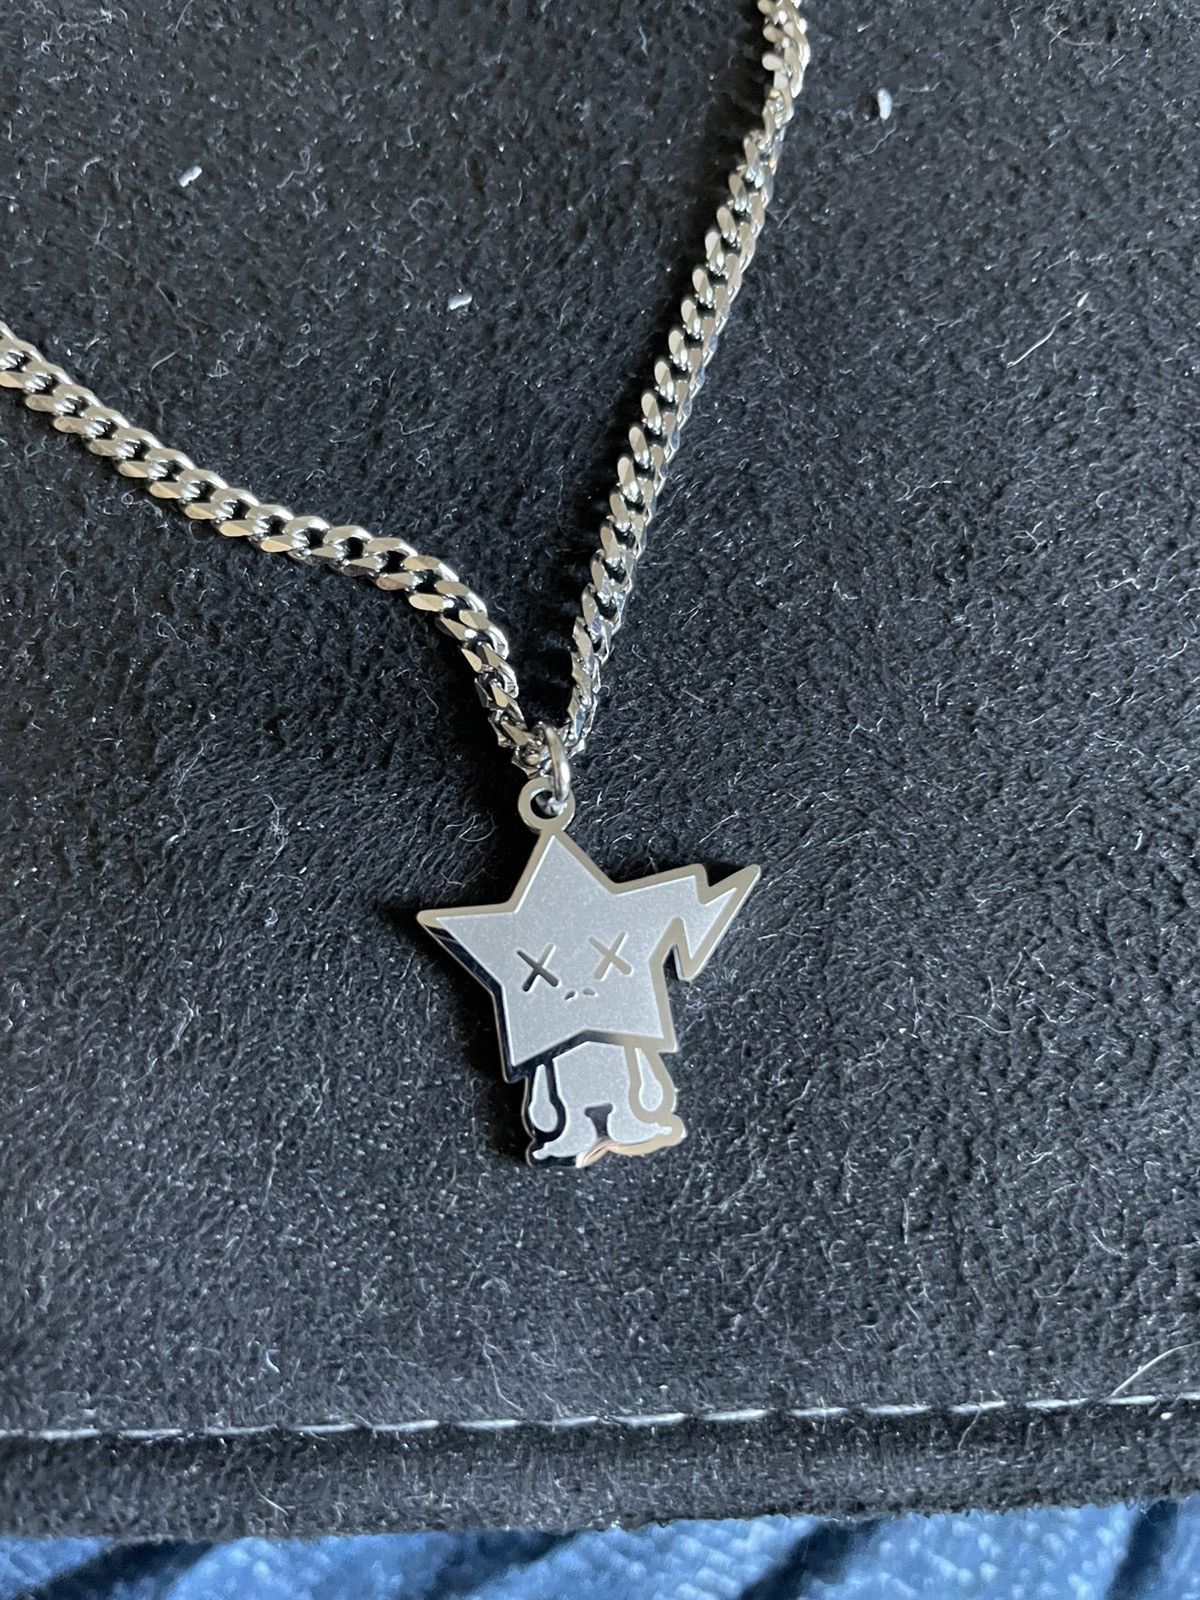 Streetwear Thryfty Starboy Necklace | Grailed